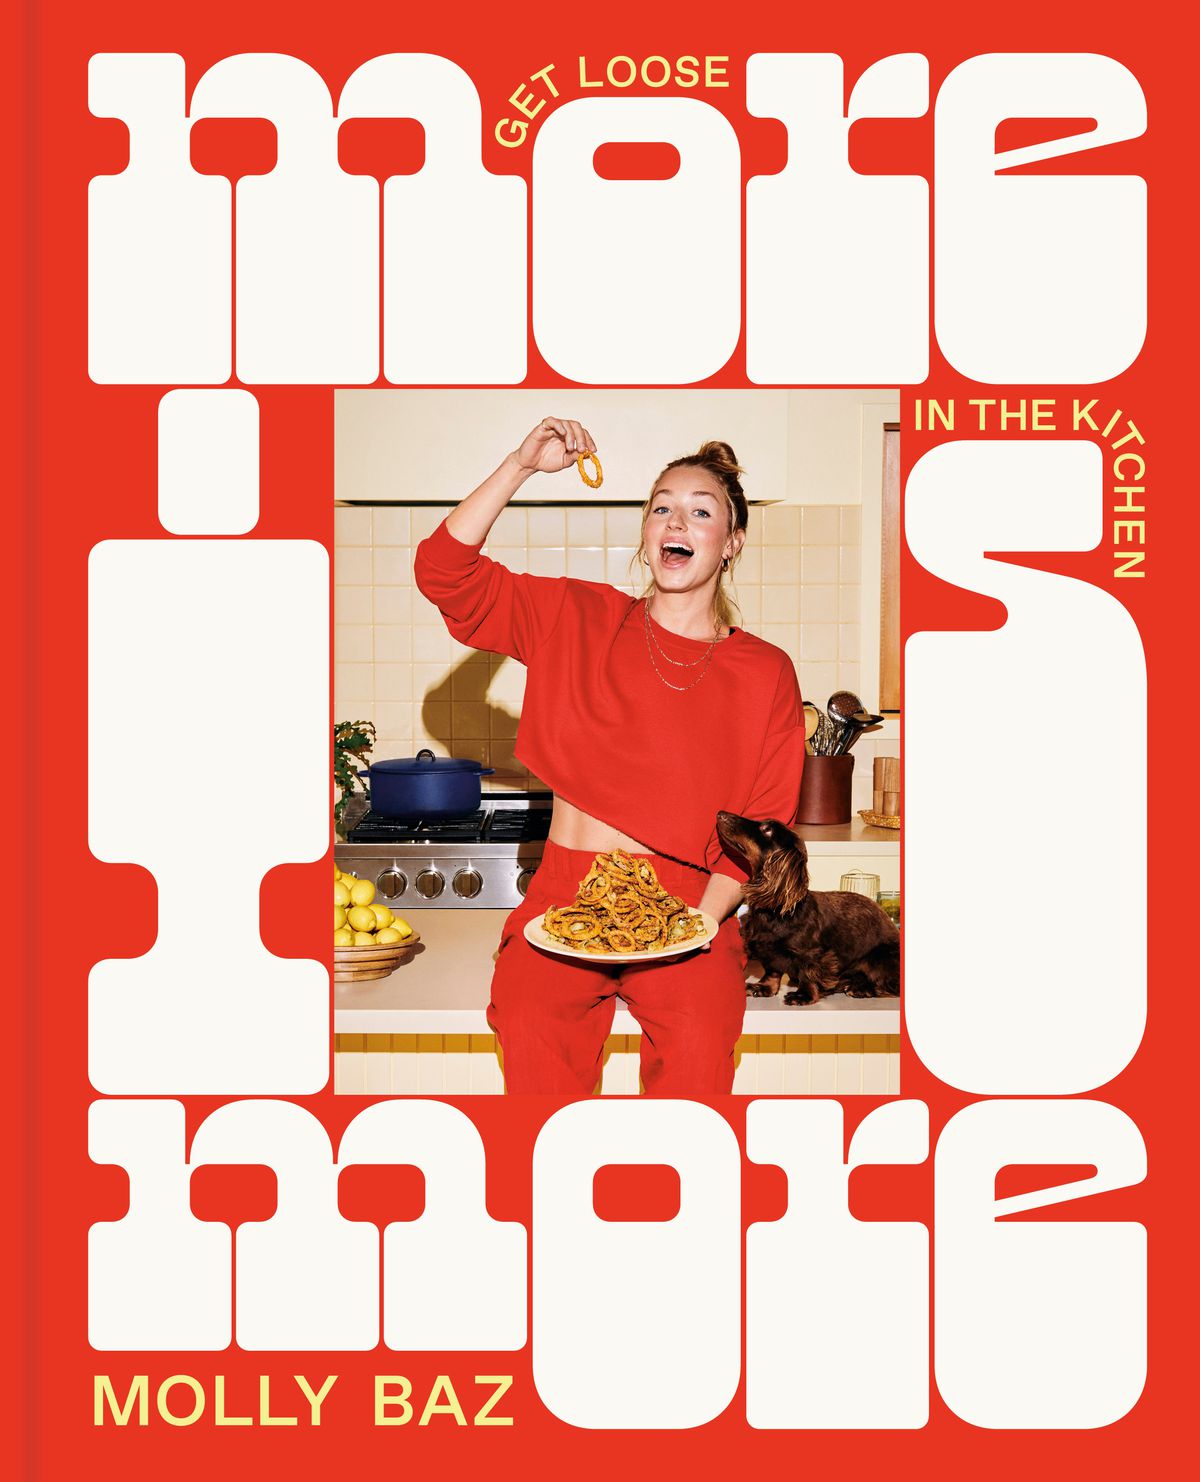 The cover of Molly Baz’s More Is More